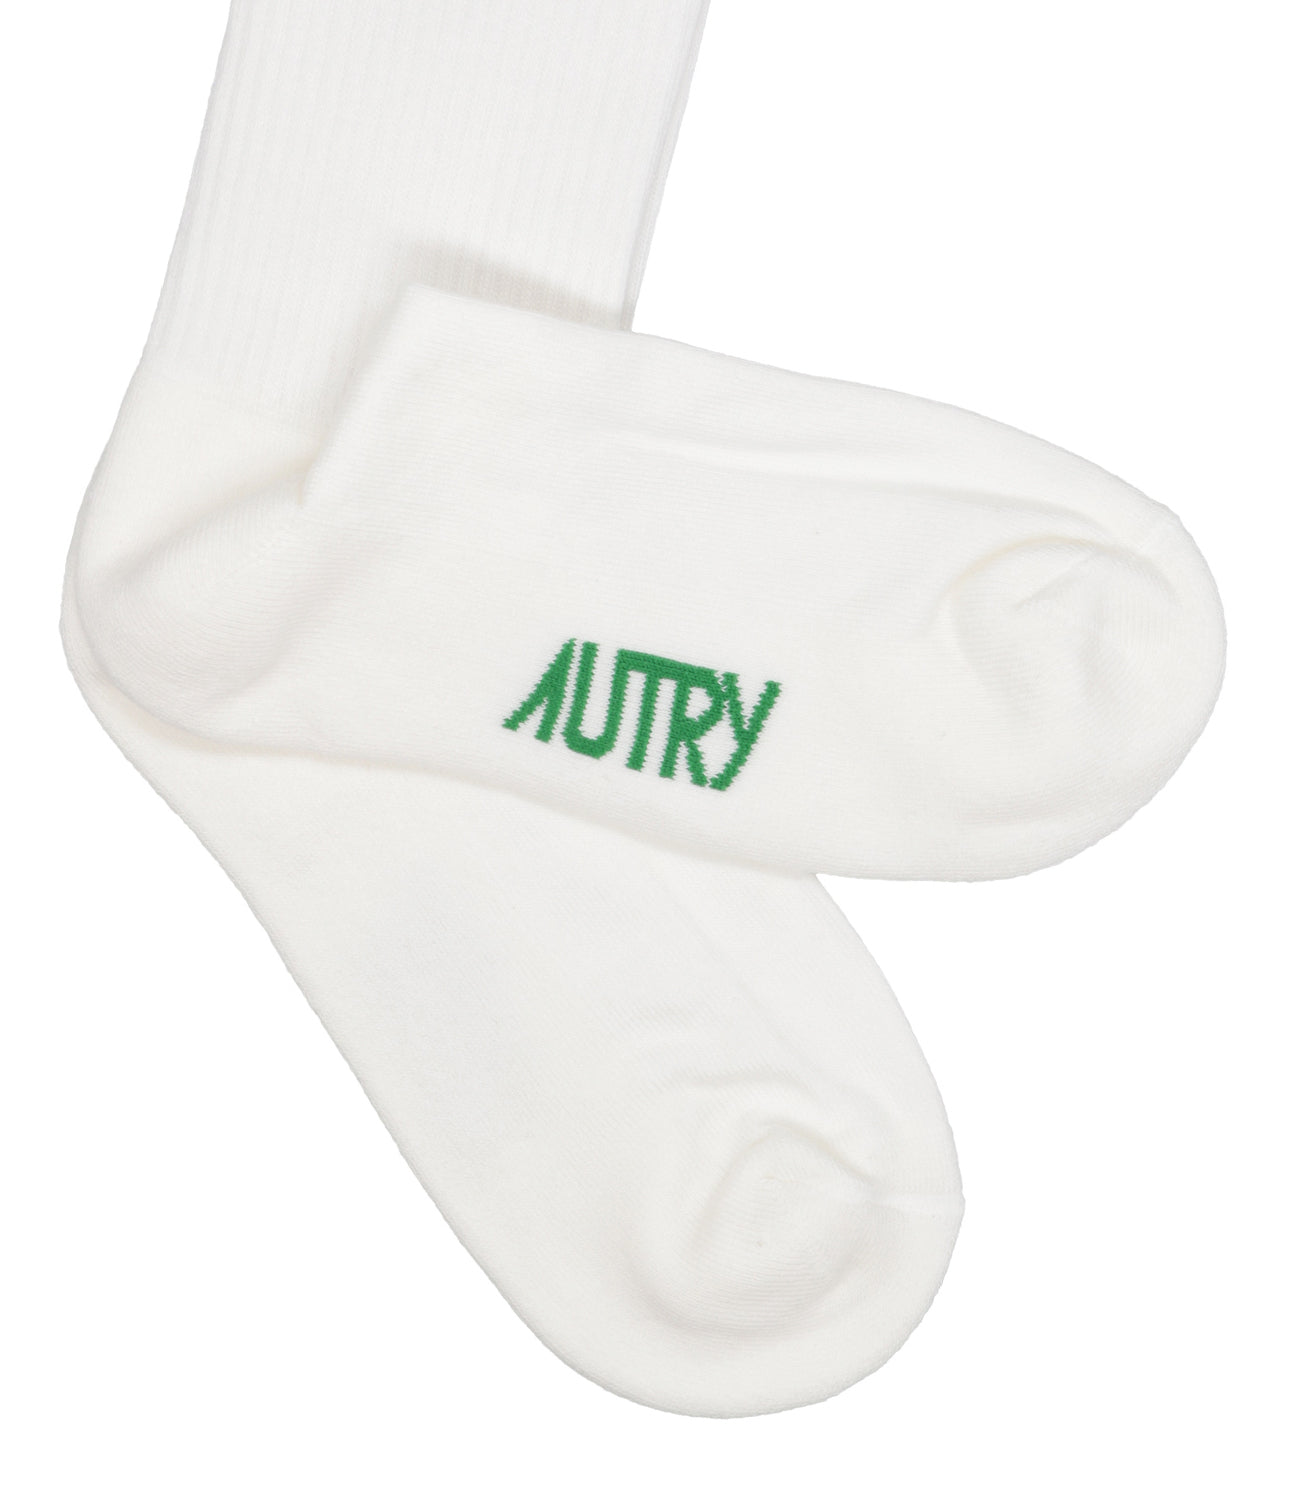 Autry | White and Green Socks